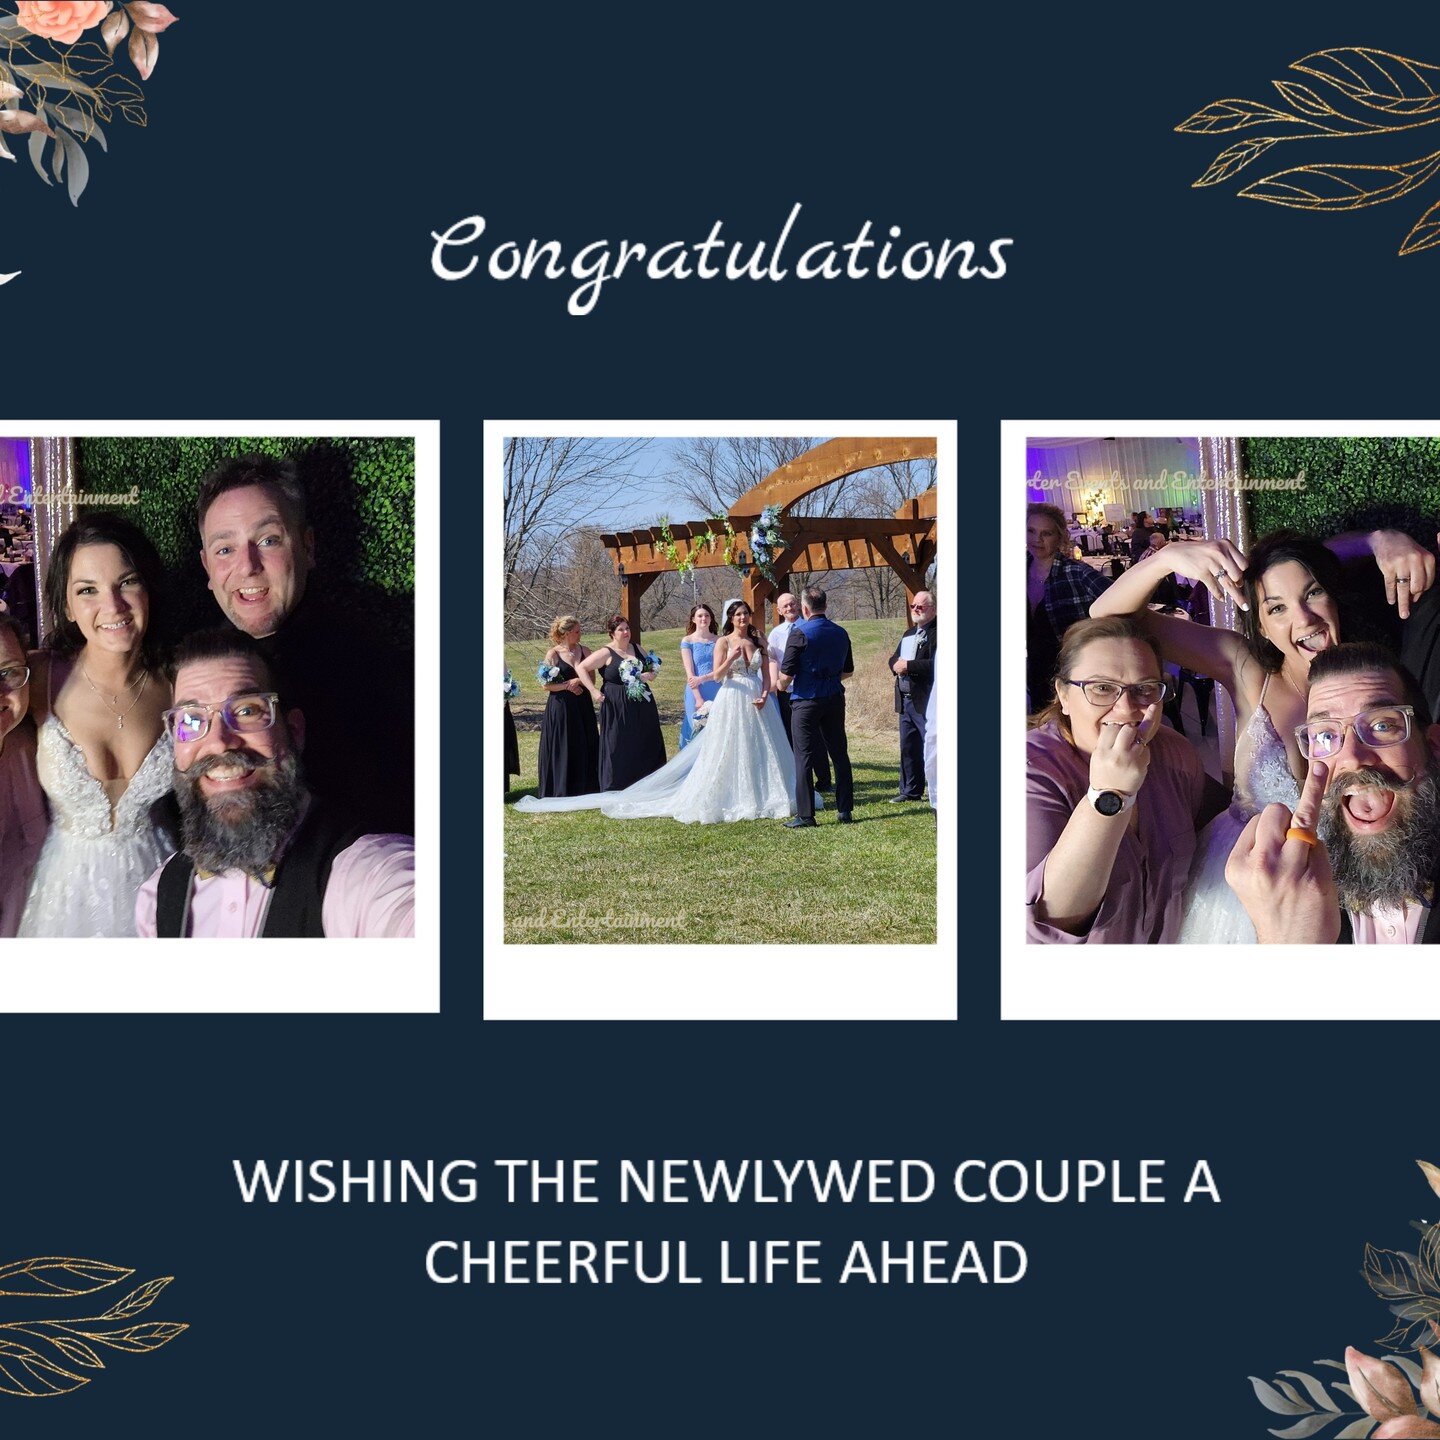 #weddingwednesday 

On 4/8 @snapdragonarts and @punkminister had the pleasure of DJing and doing Photo Booth for Miranda and Rich! It was such a beautiful wedding and venue and we had so much fun helping this wonderful couple celebrate their love! We